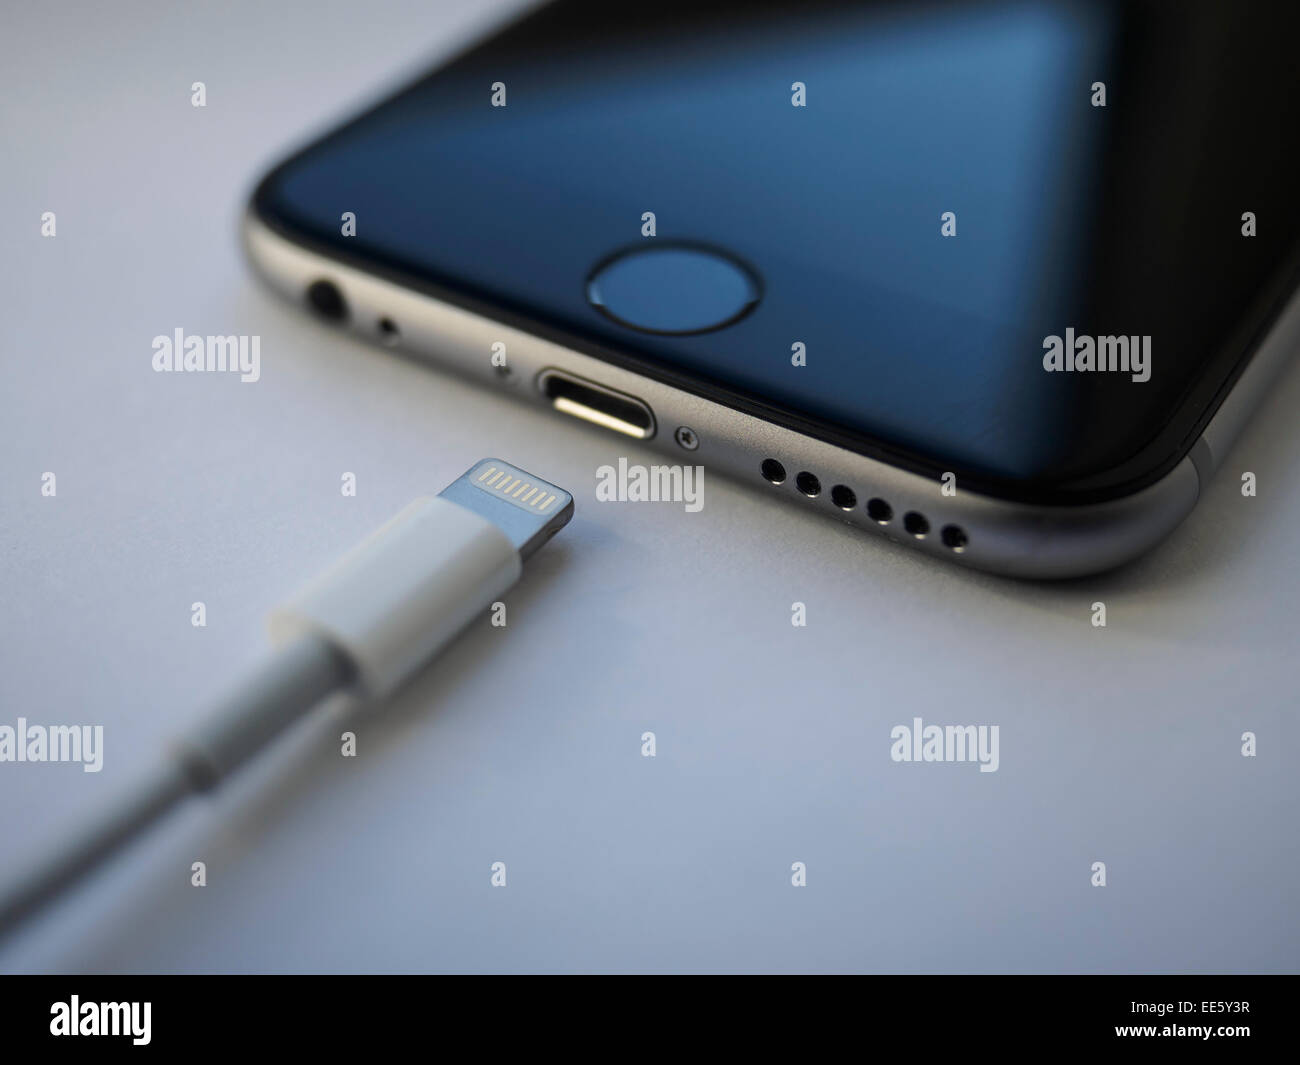 Charging cable and lightning port connector of an Apple iPhone 6 smartphone Stock Photo